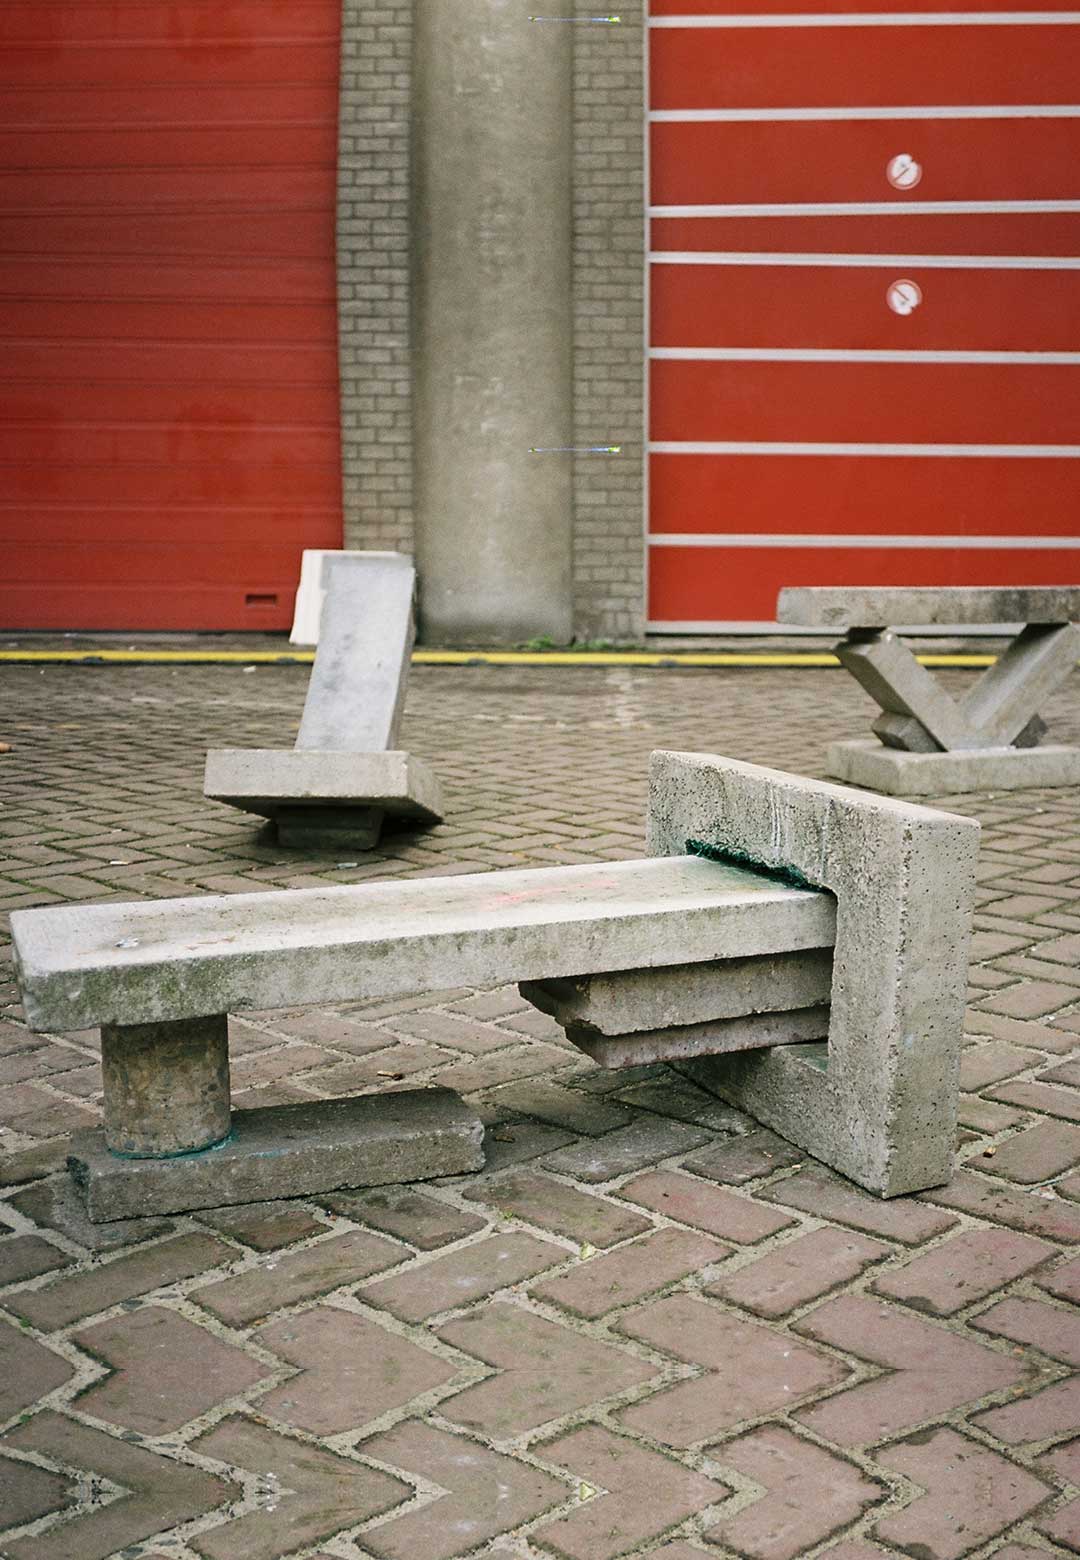 Stacked Street rejuvenates street furniture with the forgotten materiality of urban cities